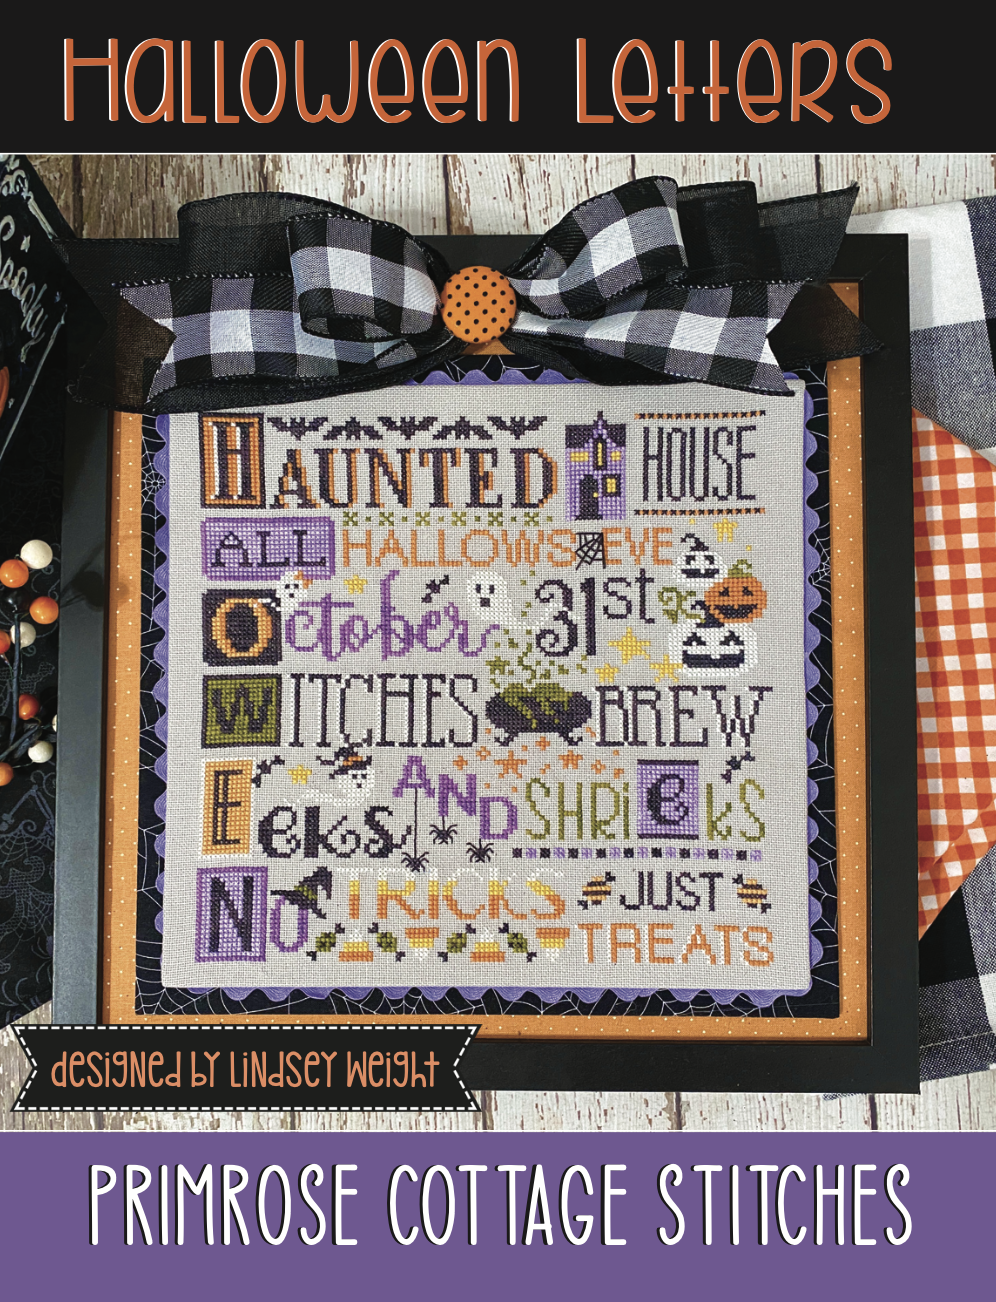 Halloween Letters by Primrose Cottage Stitches